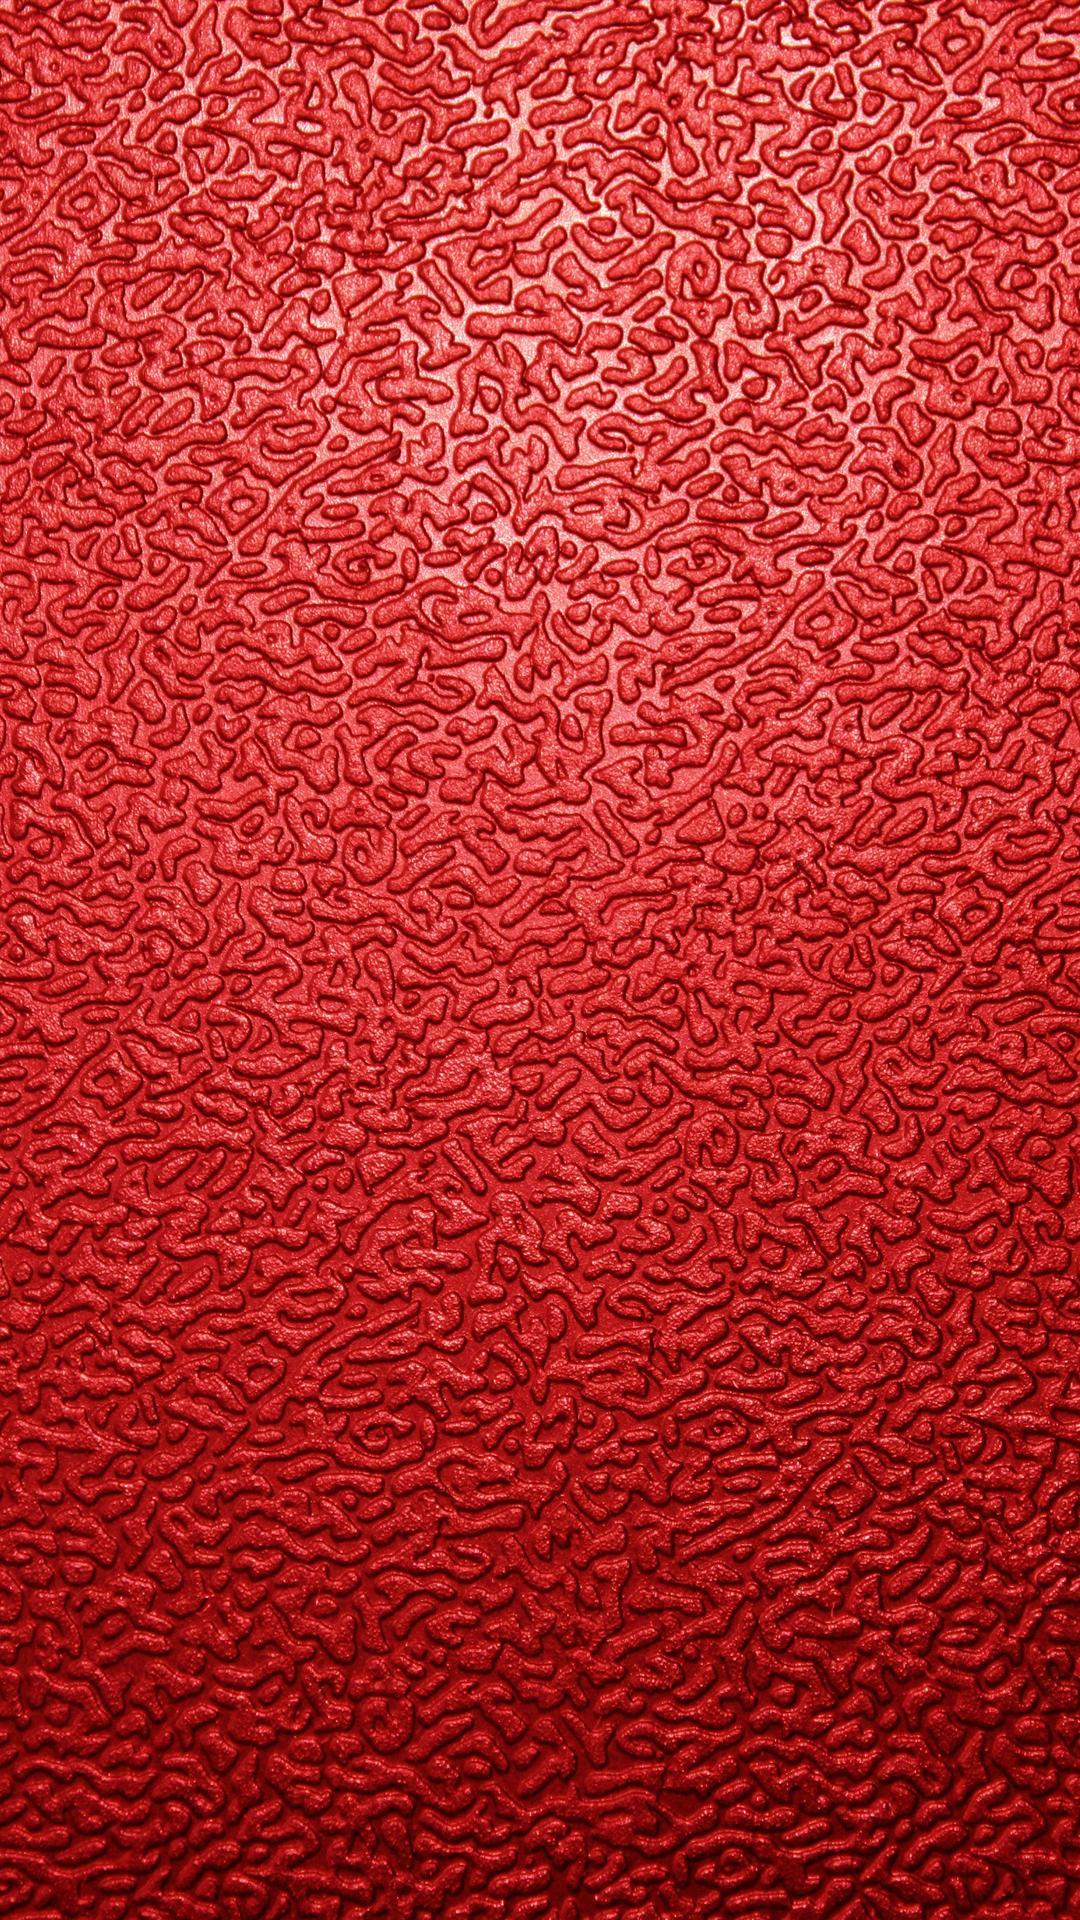 Samsung Galaxy A9 Pro Wallpaper: Rubber Red Android Wallpaper